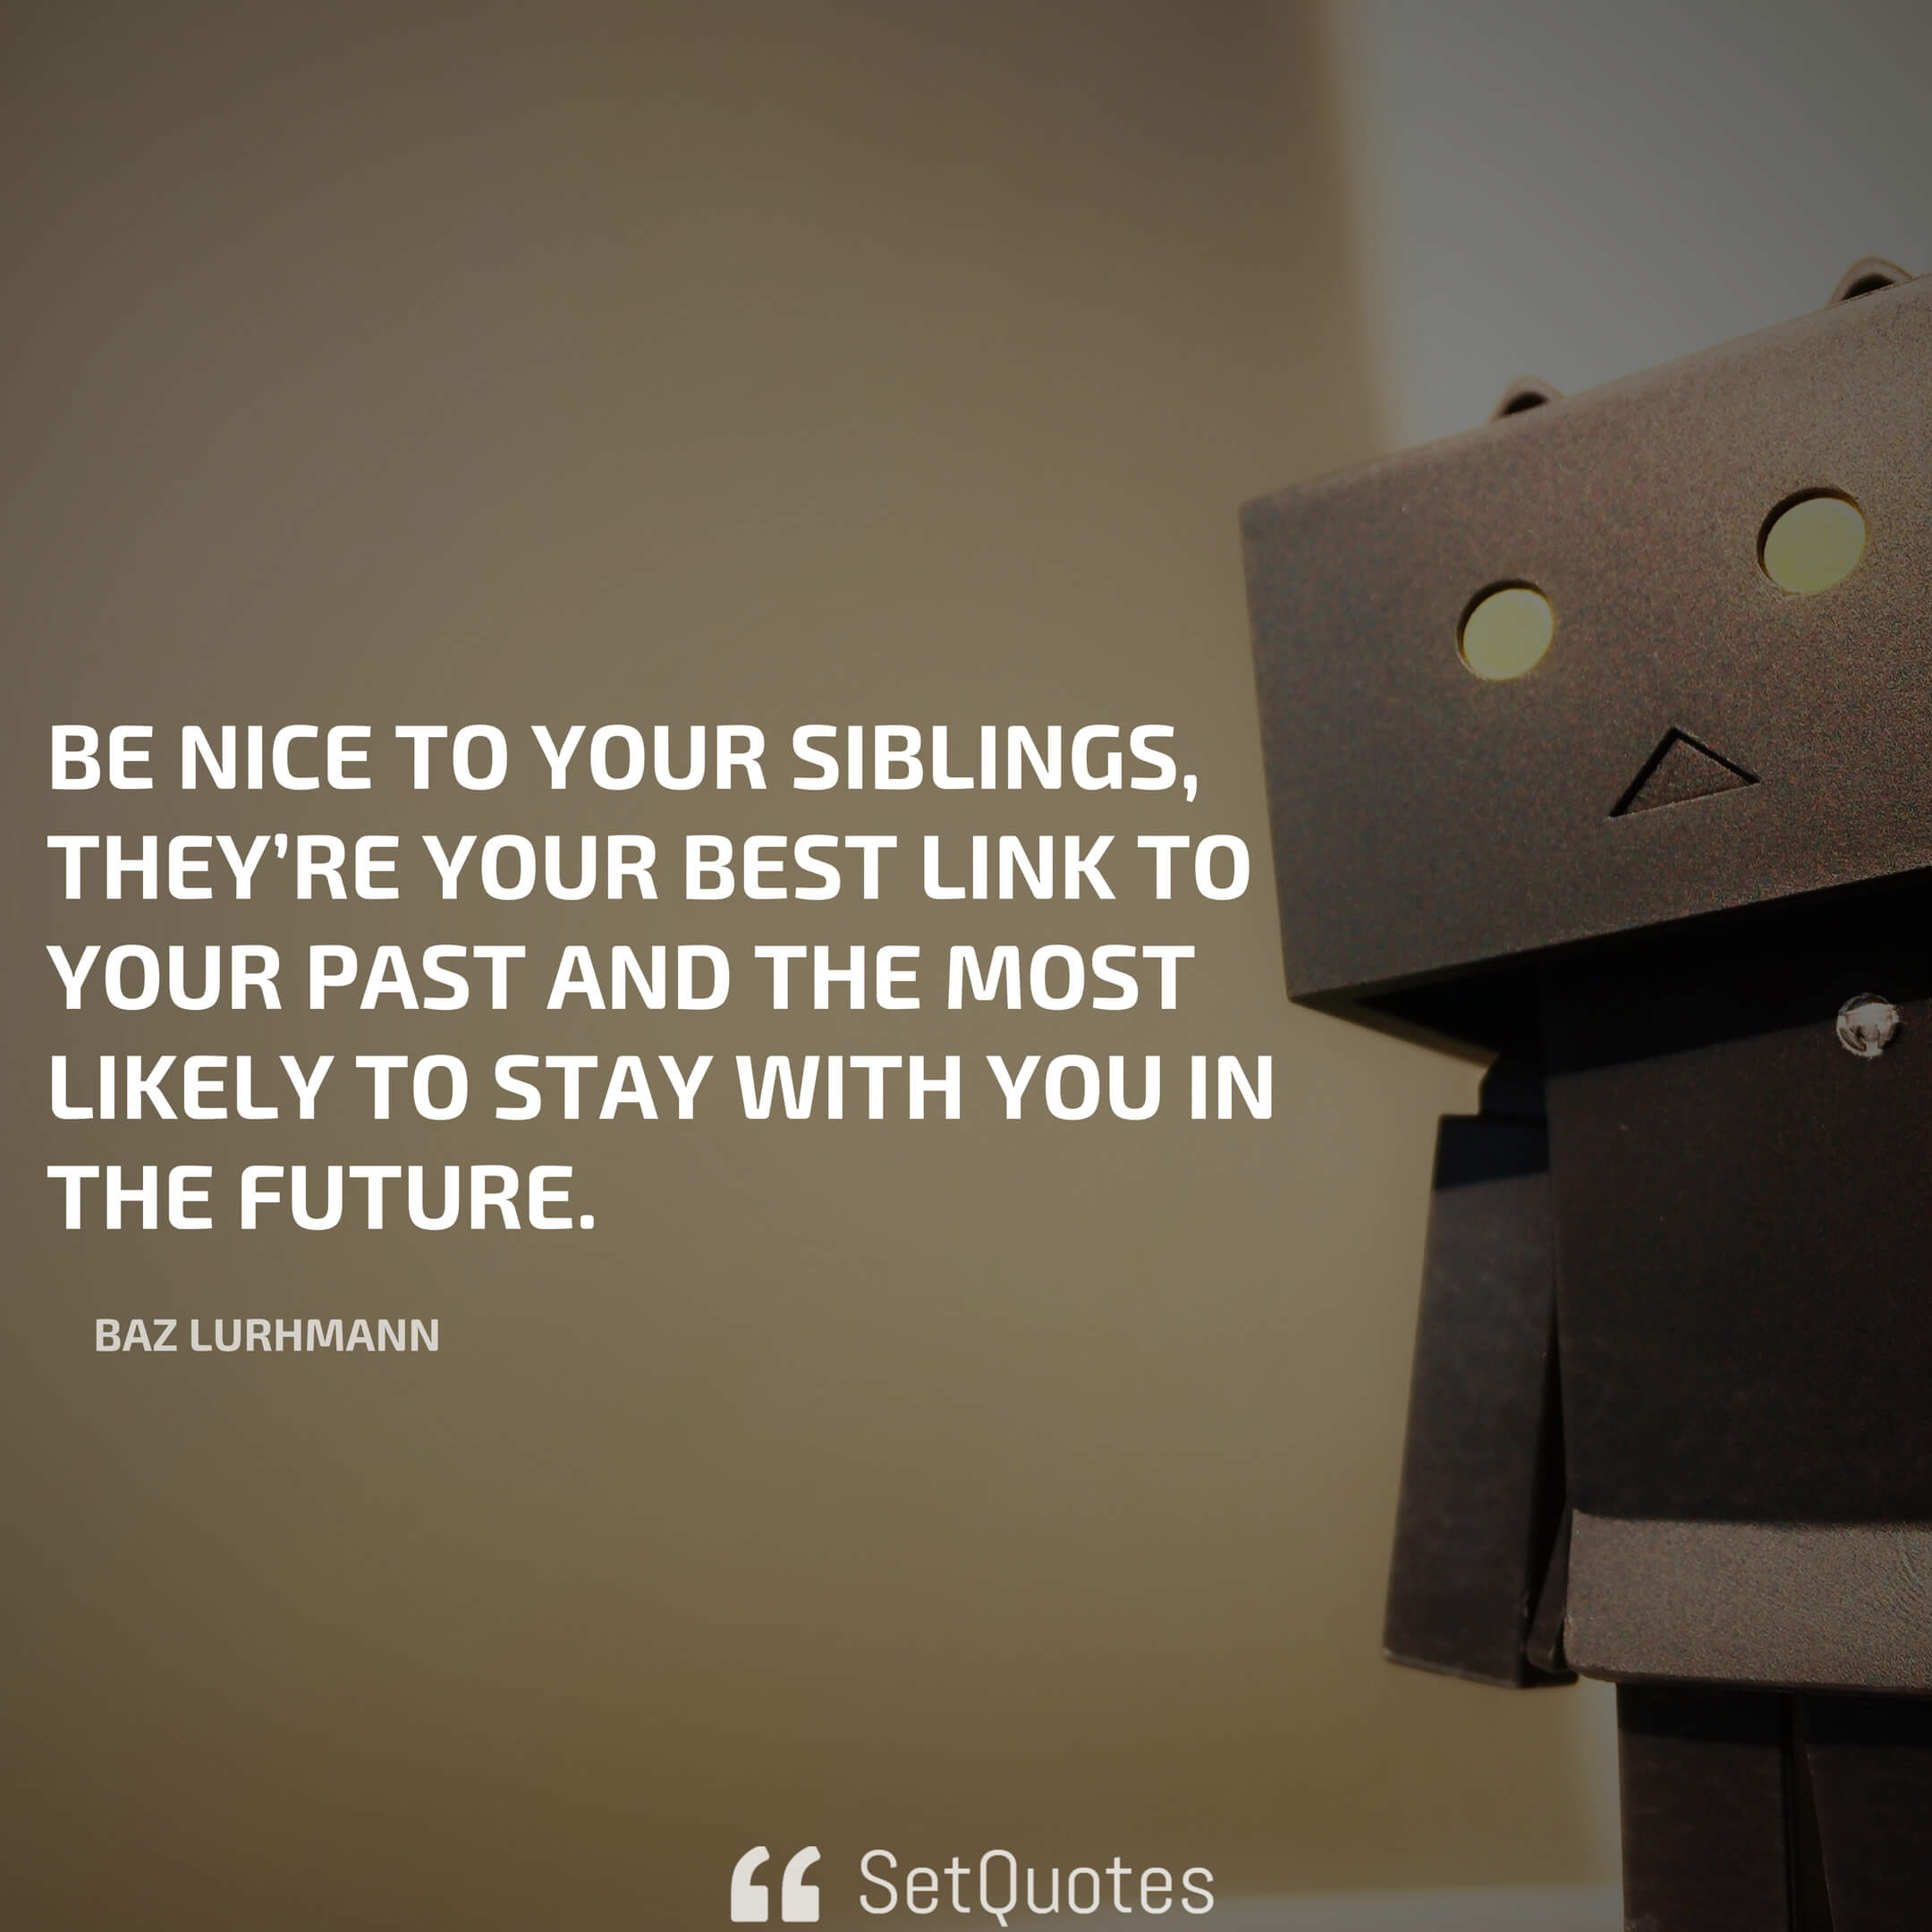 “Be nice to your siblings, they’re your best link to your past and the most likely to stay with you in the future.” – Baz Lurhmann